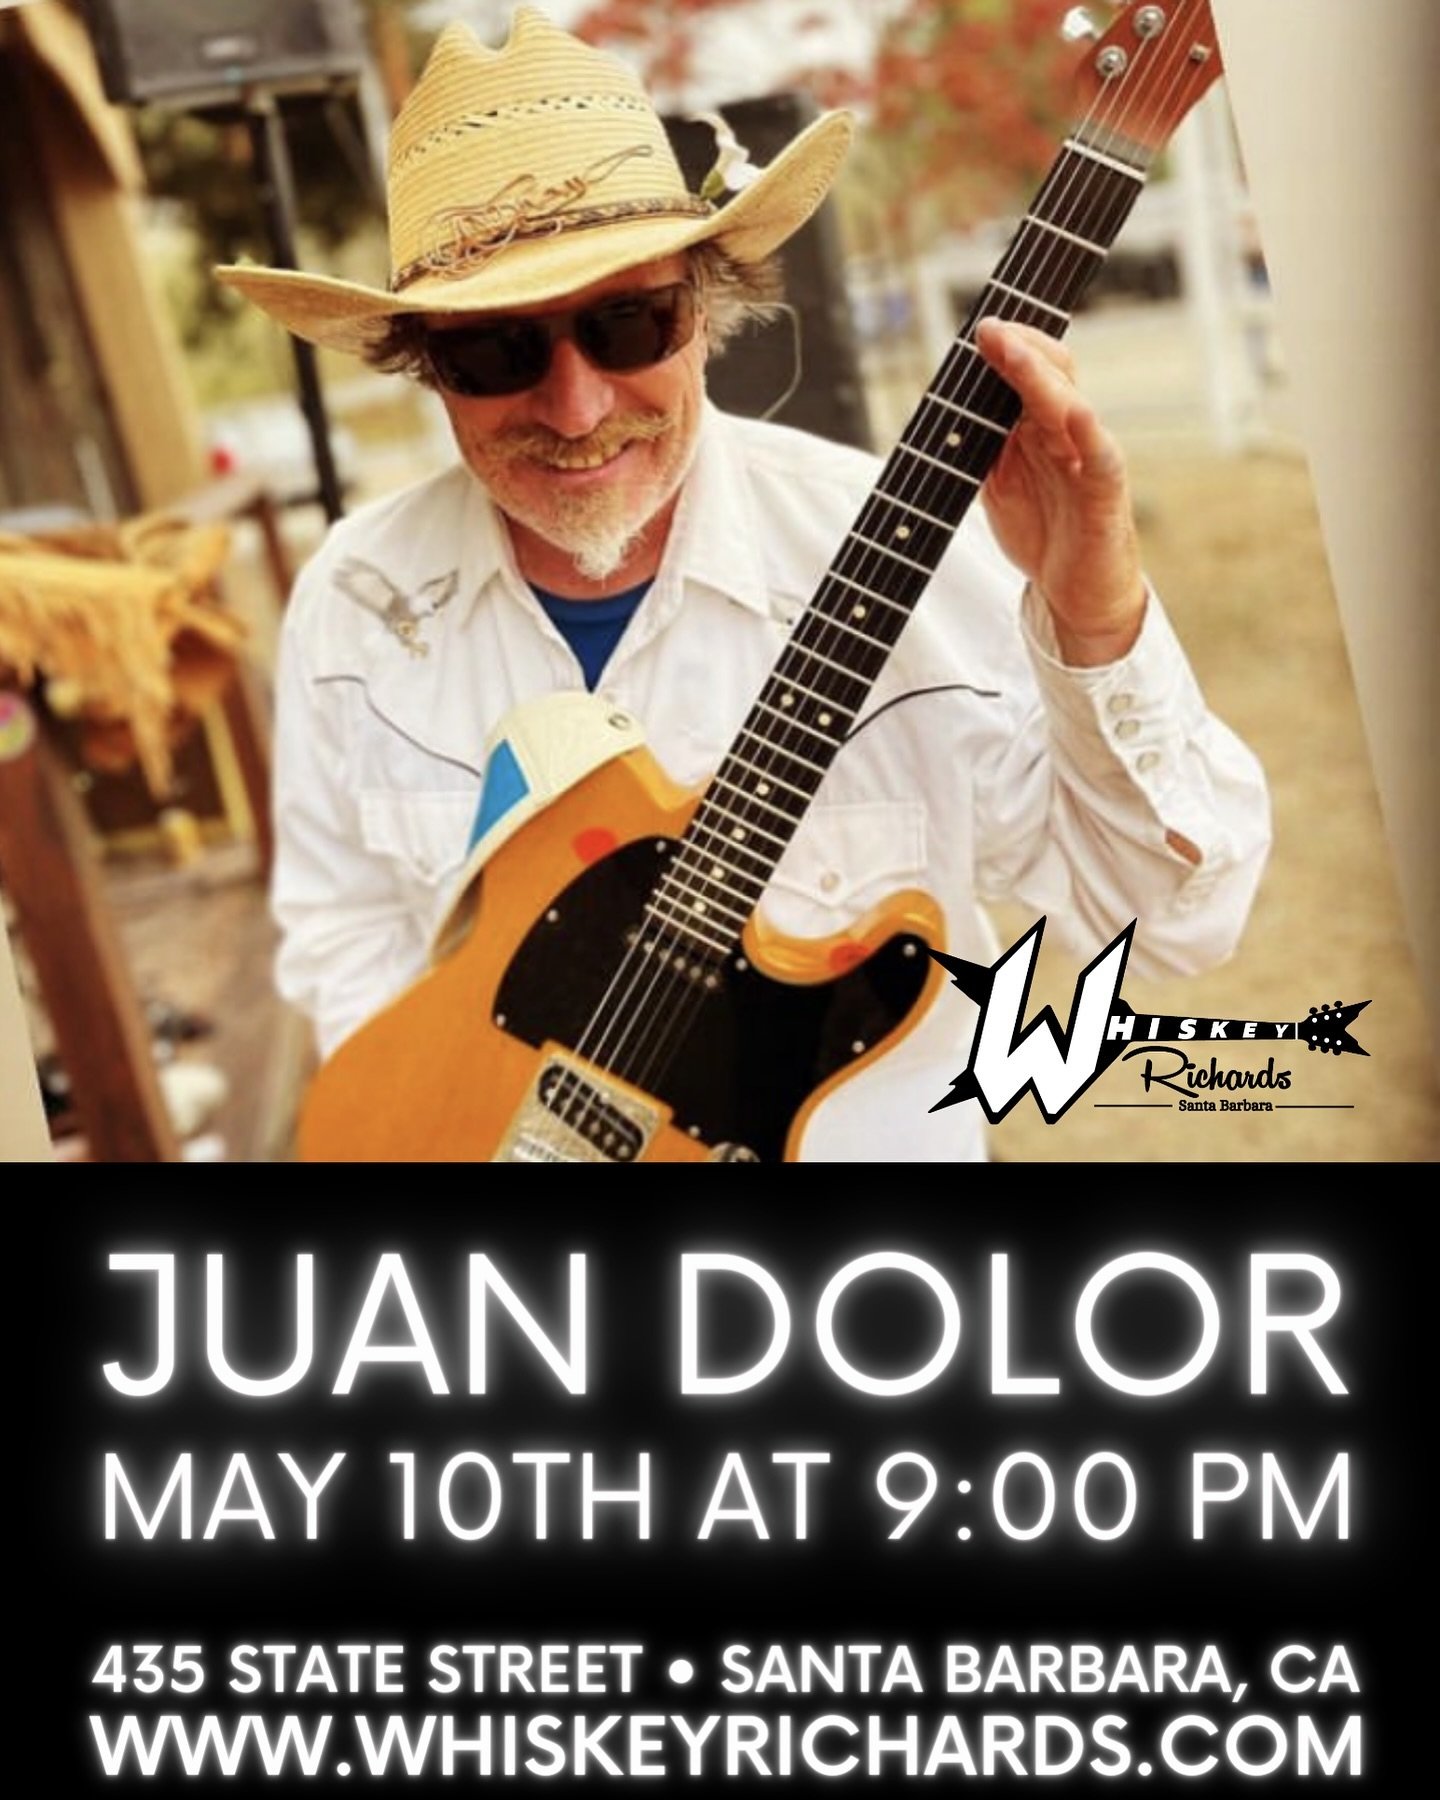 Join us Friday, 5/10 at 9:00 pm for a funky music party! Juan Dolor will be kicking off a great weekend with some funky entertainment! #WhiskeyRichards #SantaBarbaraNights #DowntownSB #MagicMoments #SantaBarbara #Funk #LiveMusic @juan.dolor.music